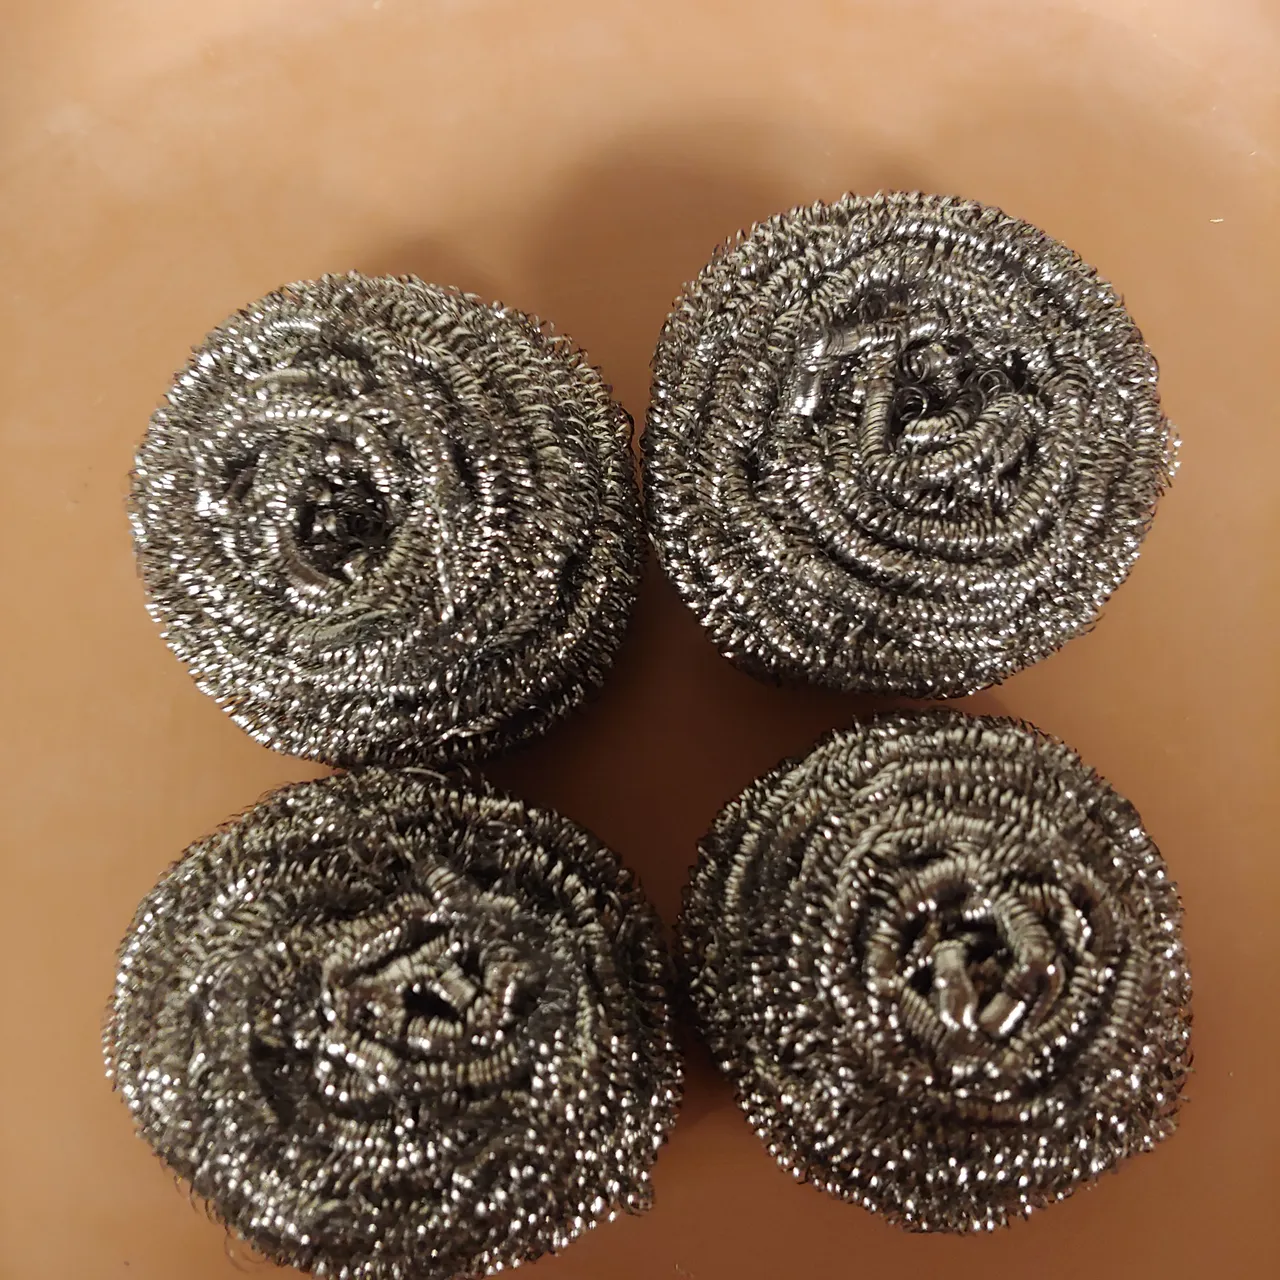 Stainless steel scrubbies photo 1